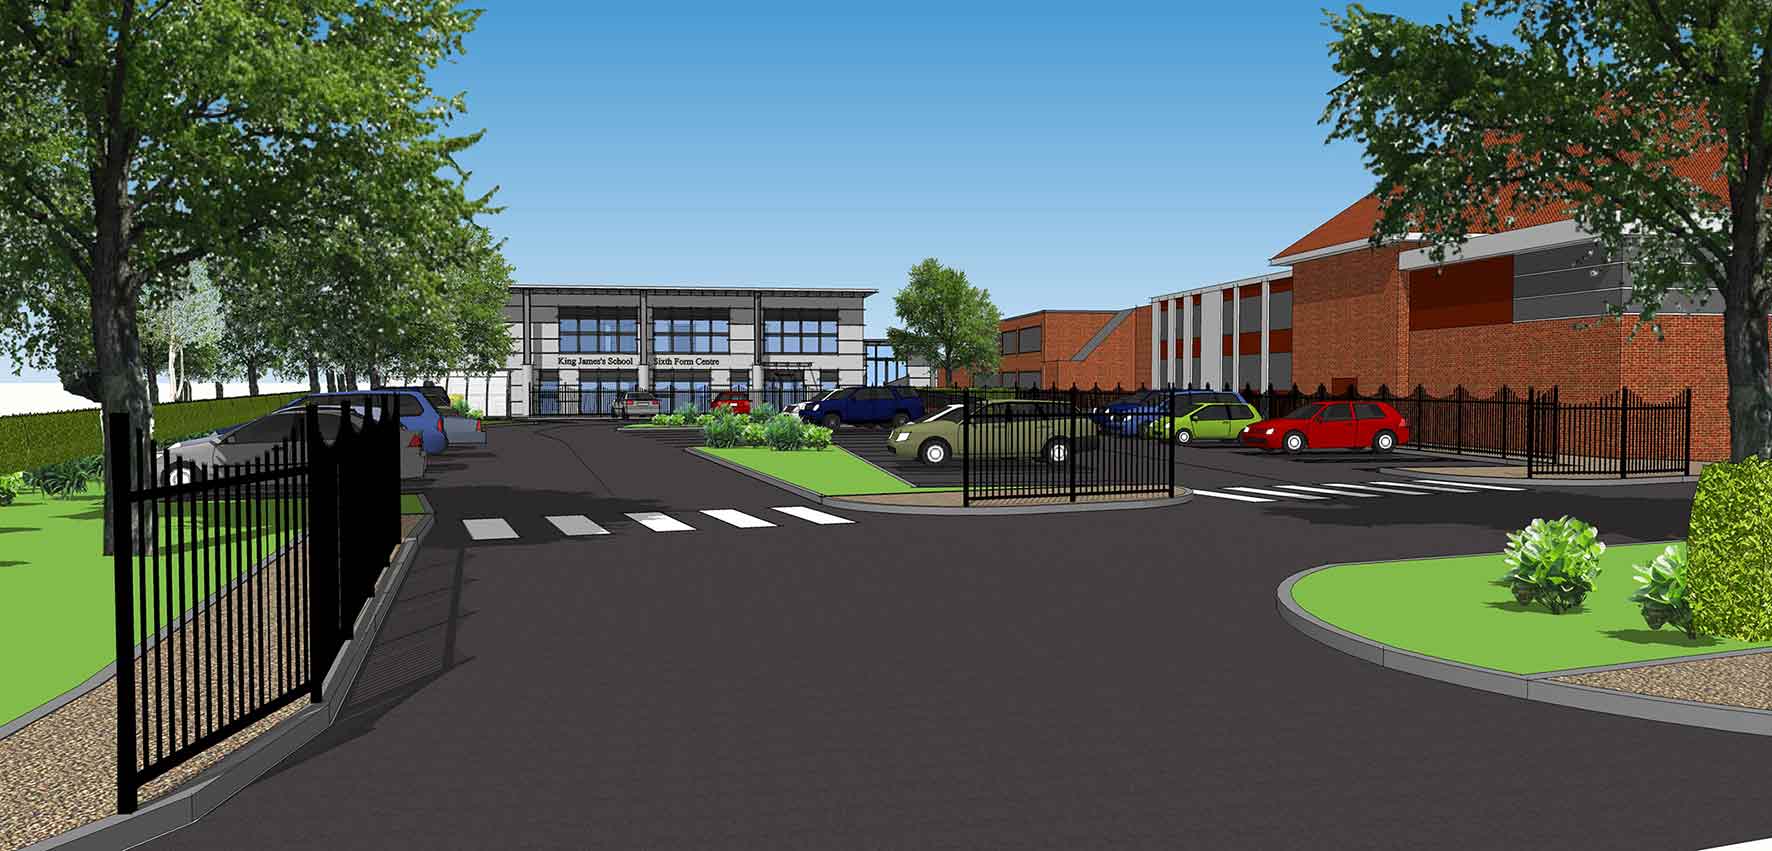 Work to start on £2m sixth form for King James School